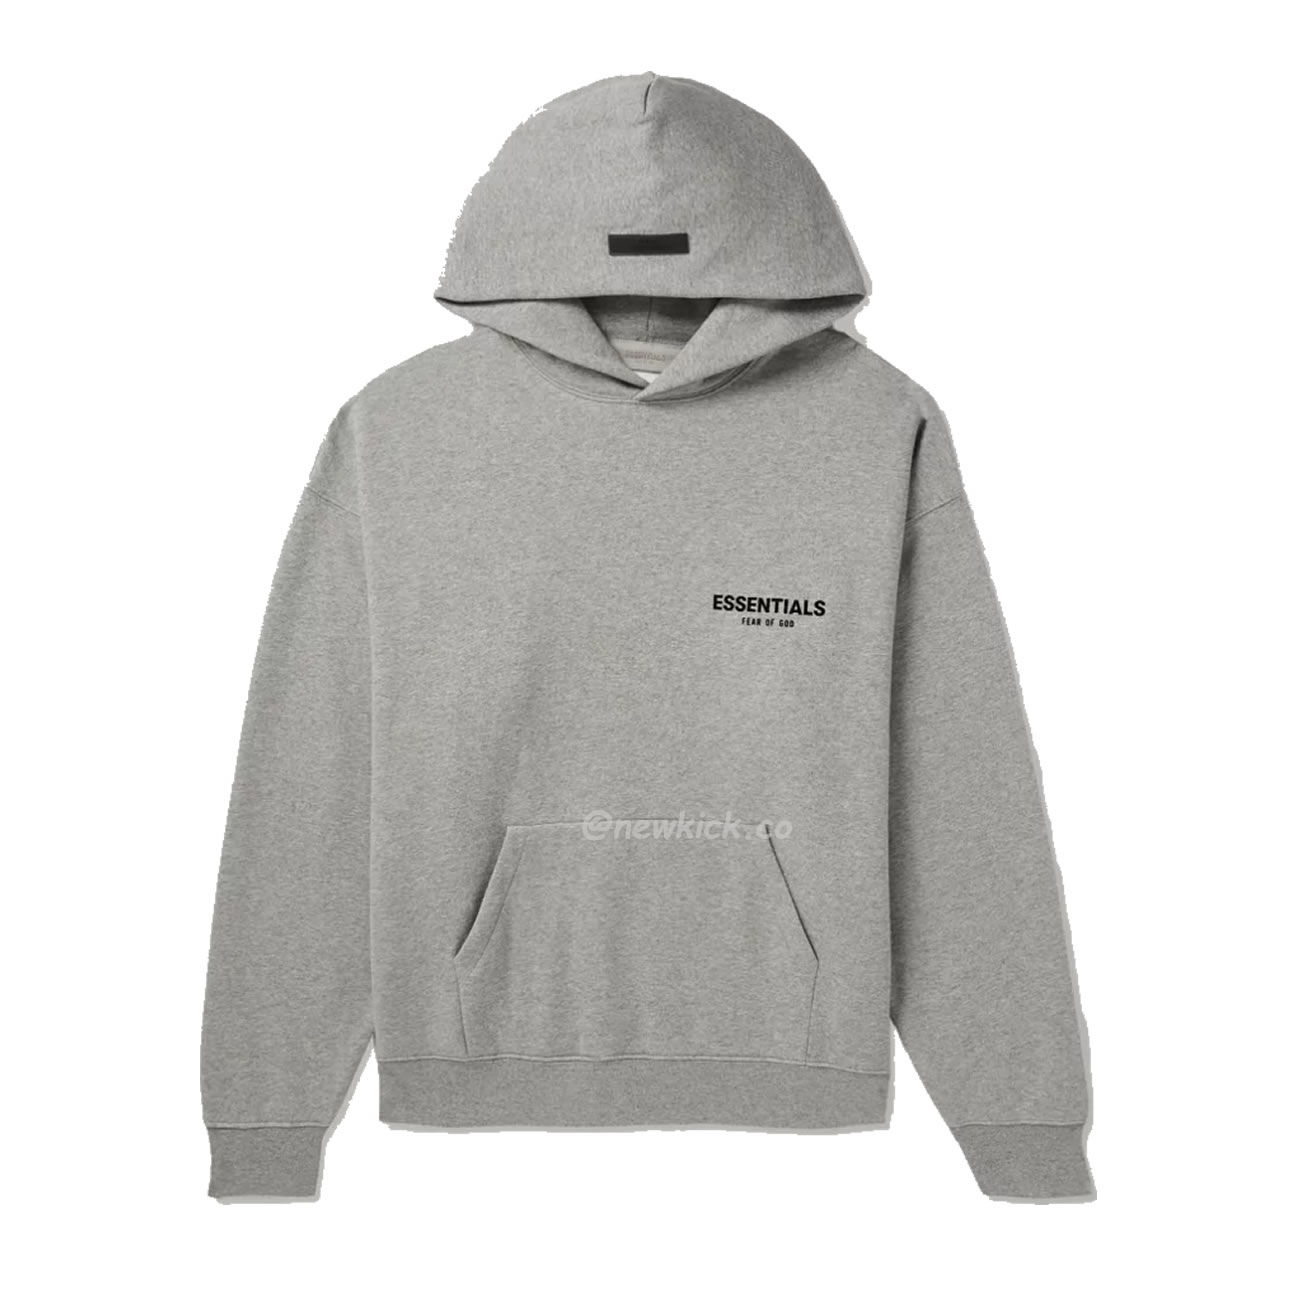 Fear Of God Essentials Core Collection Kids Pullover Hoodie Dark Heather Oatmeal (9) - newkick.org